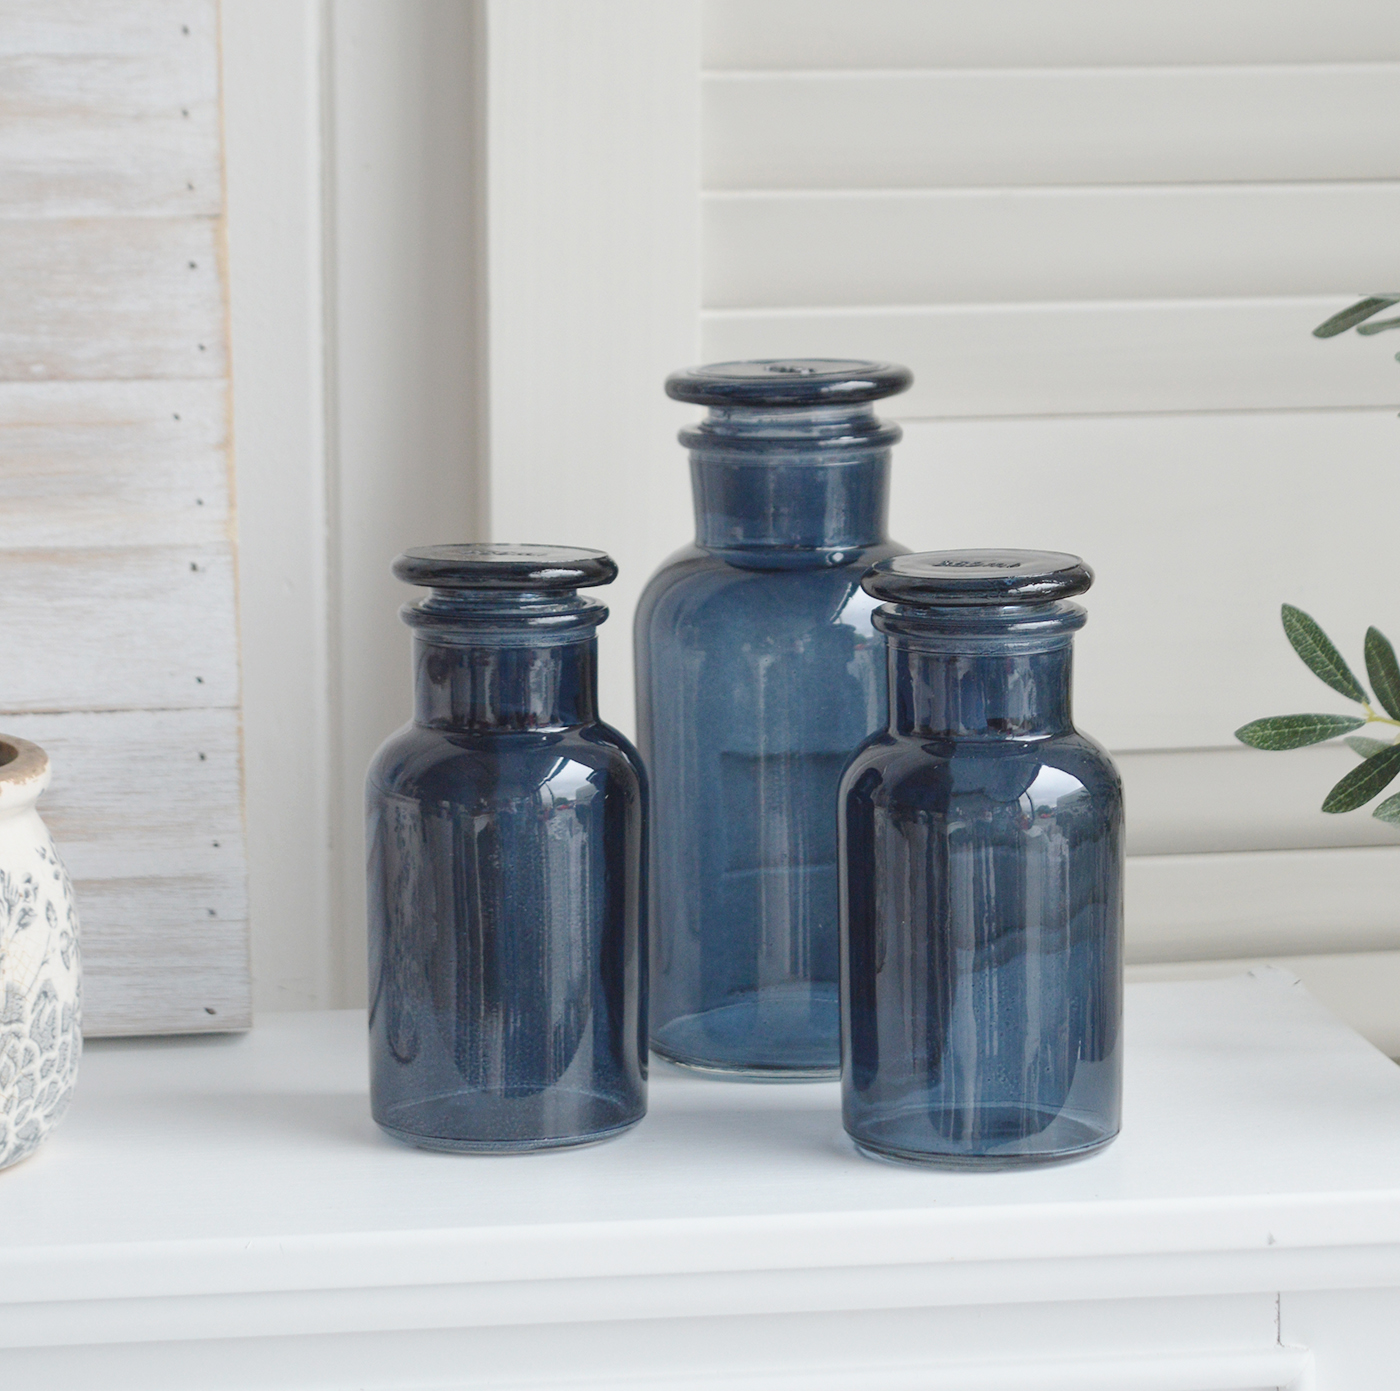 Decorative blue glass bottle with stopper from The White Lighthouse New England furniture and home accessories for country, coastal and city homes and iteriors